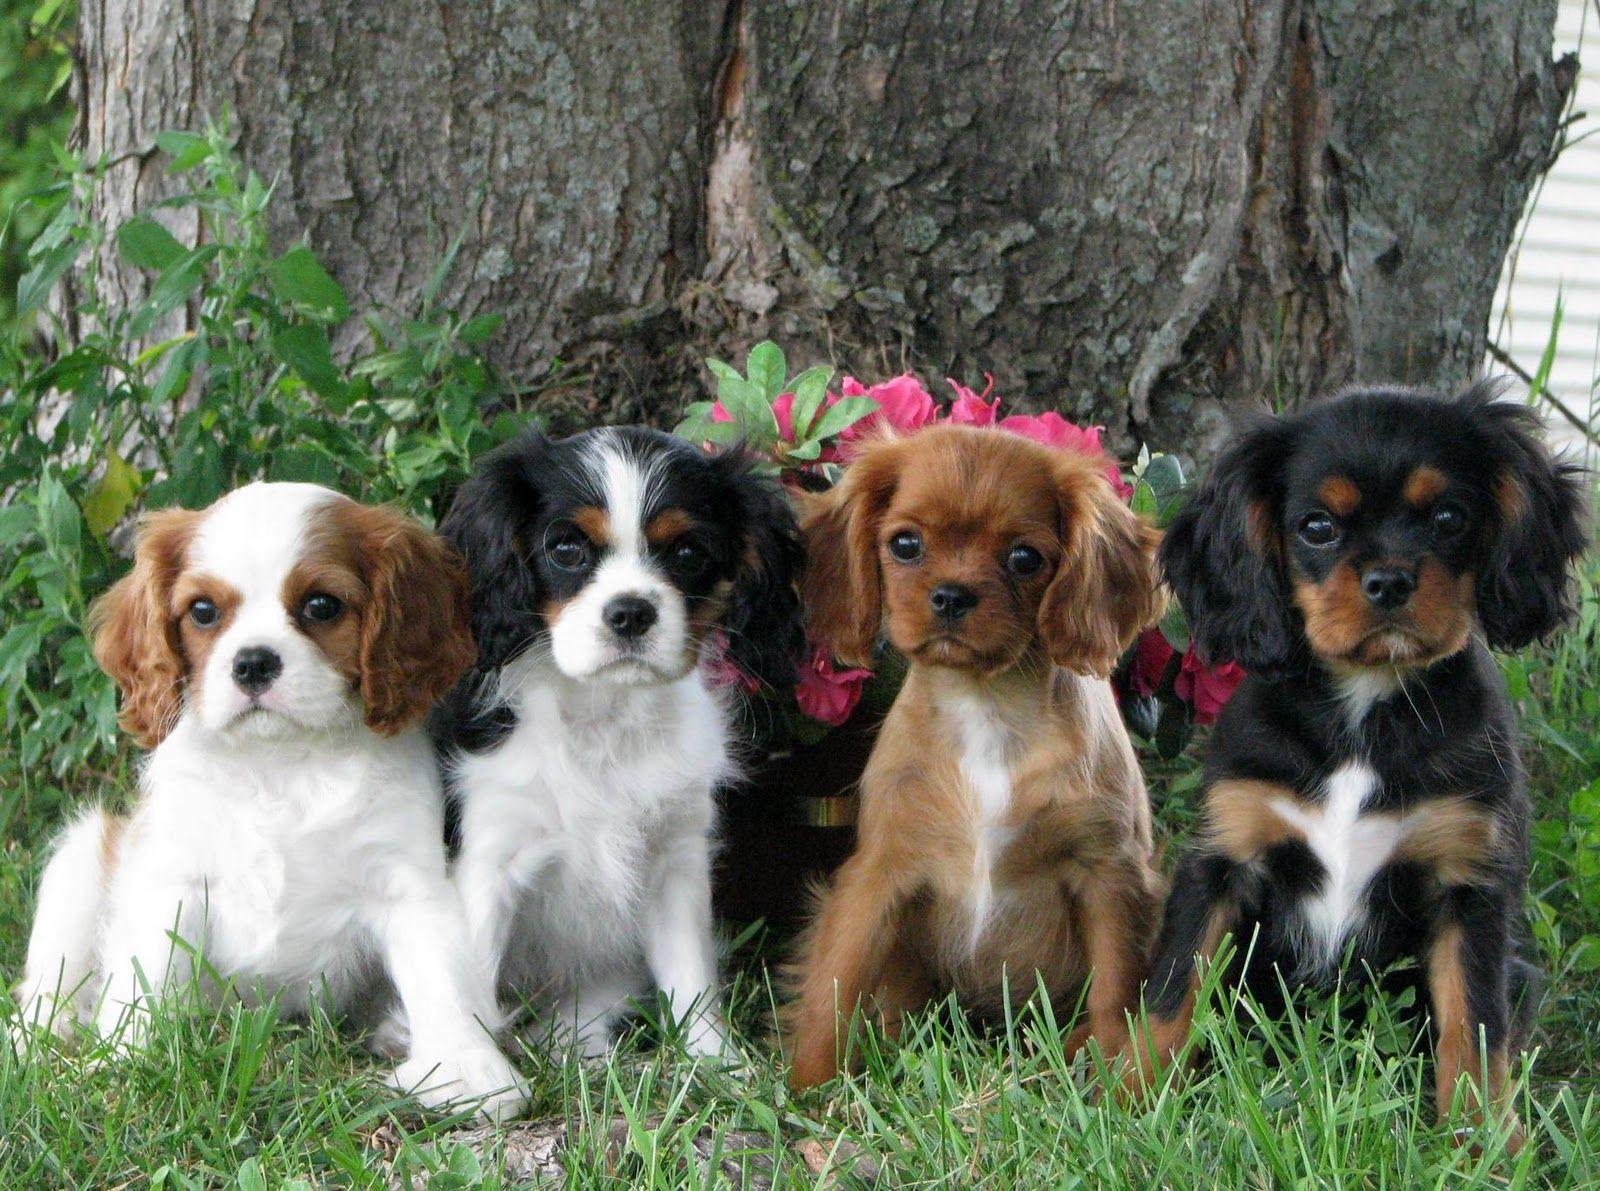 Cavalier King Charles Spaniel Wallpapers - Wallpaper Cave